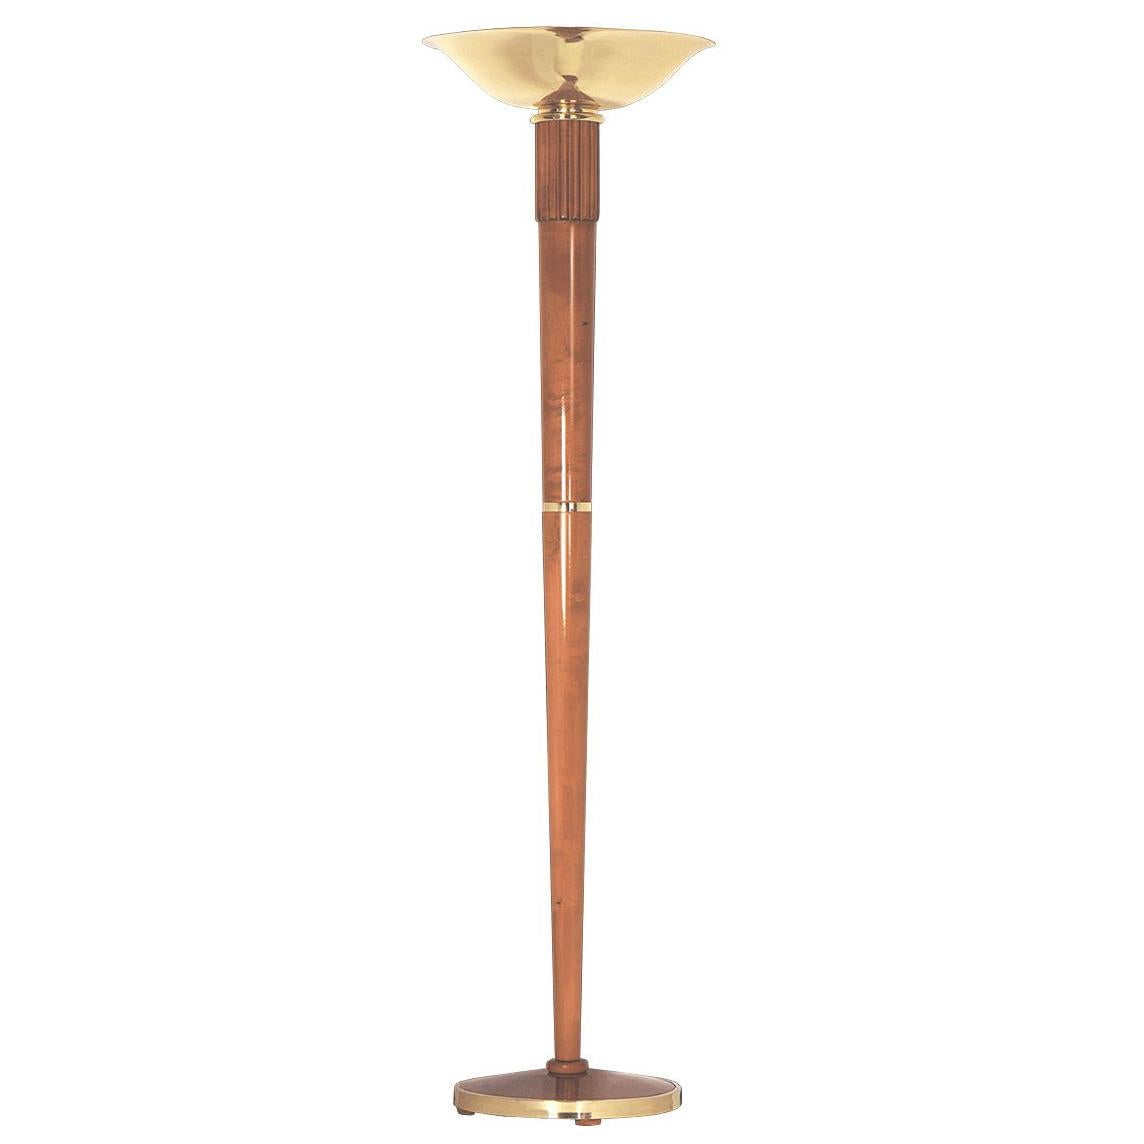 Art Deco style -  Bauhaus - Wood and Brass Floor Lamp  For Sale